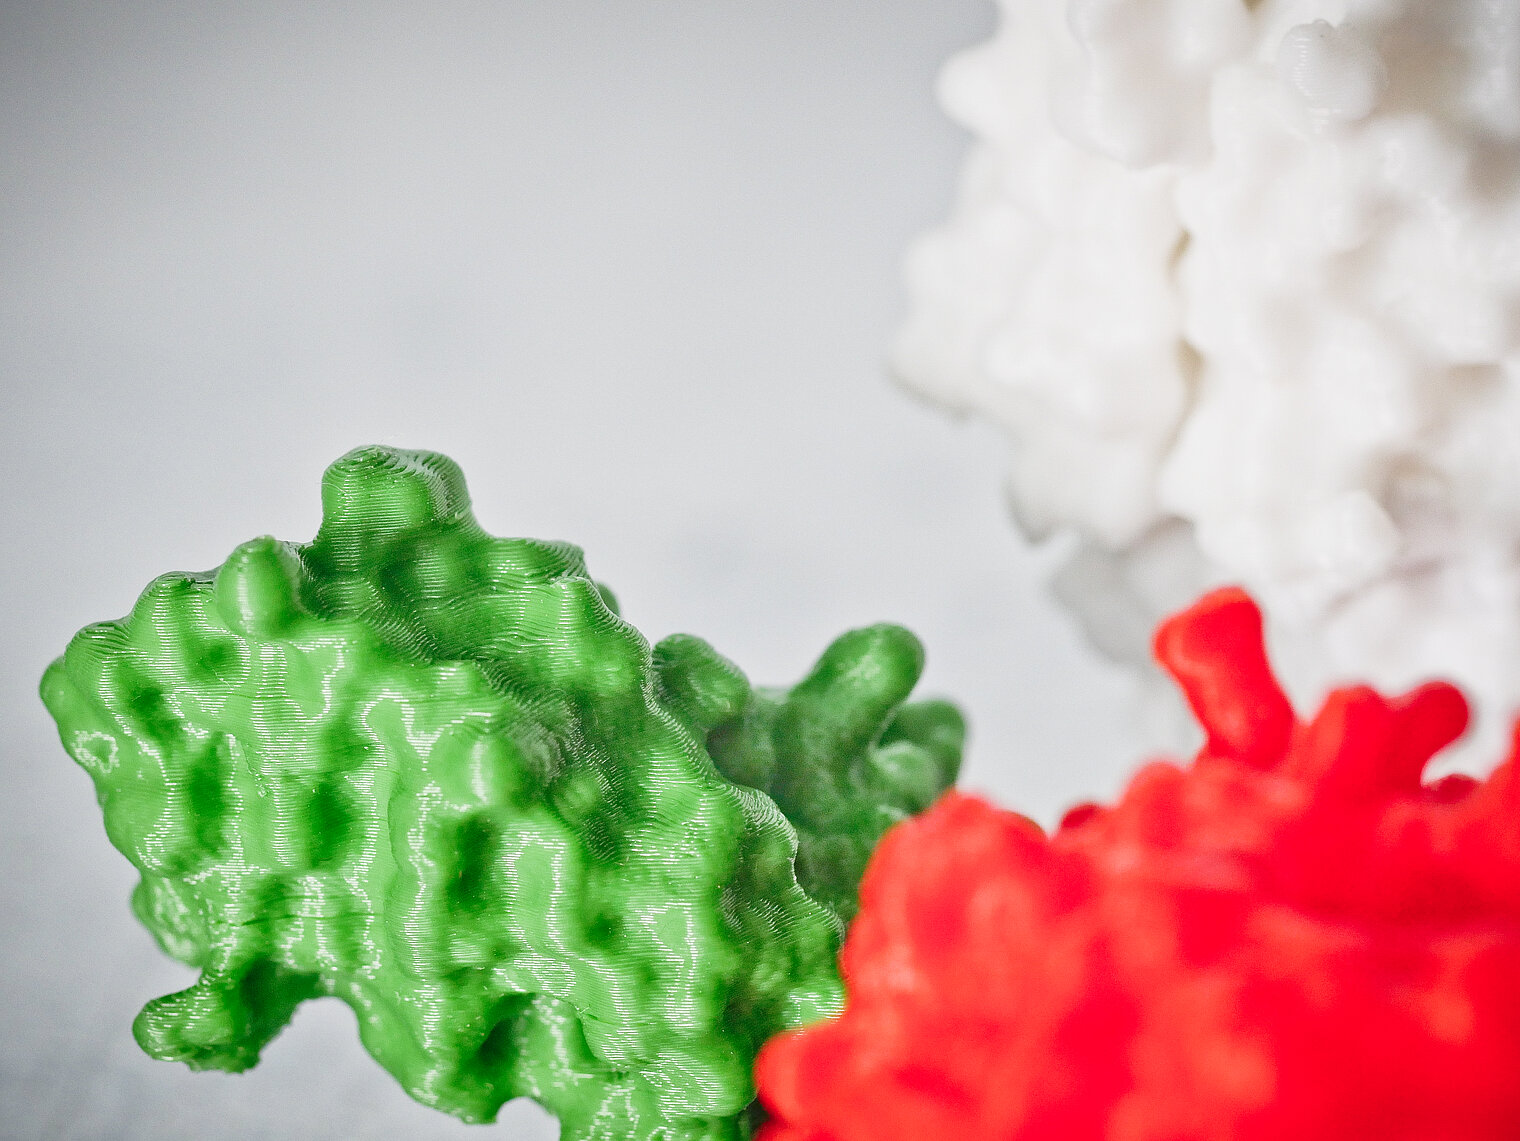 3D models of protein structures solved at the HZI.